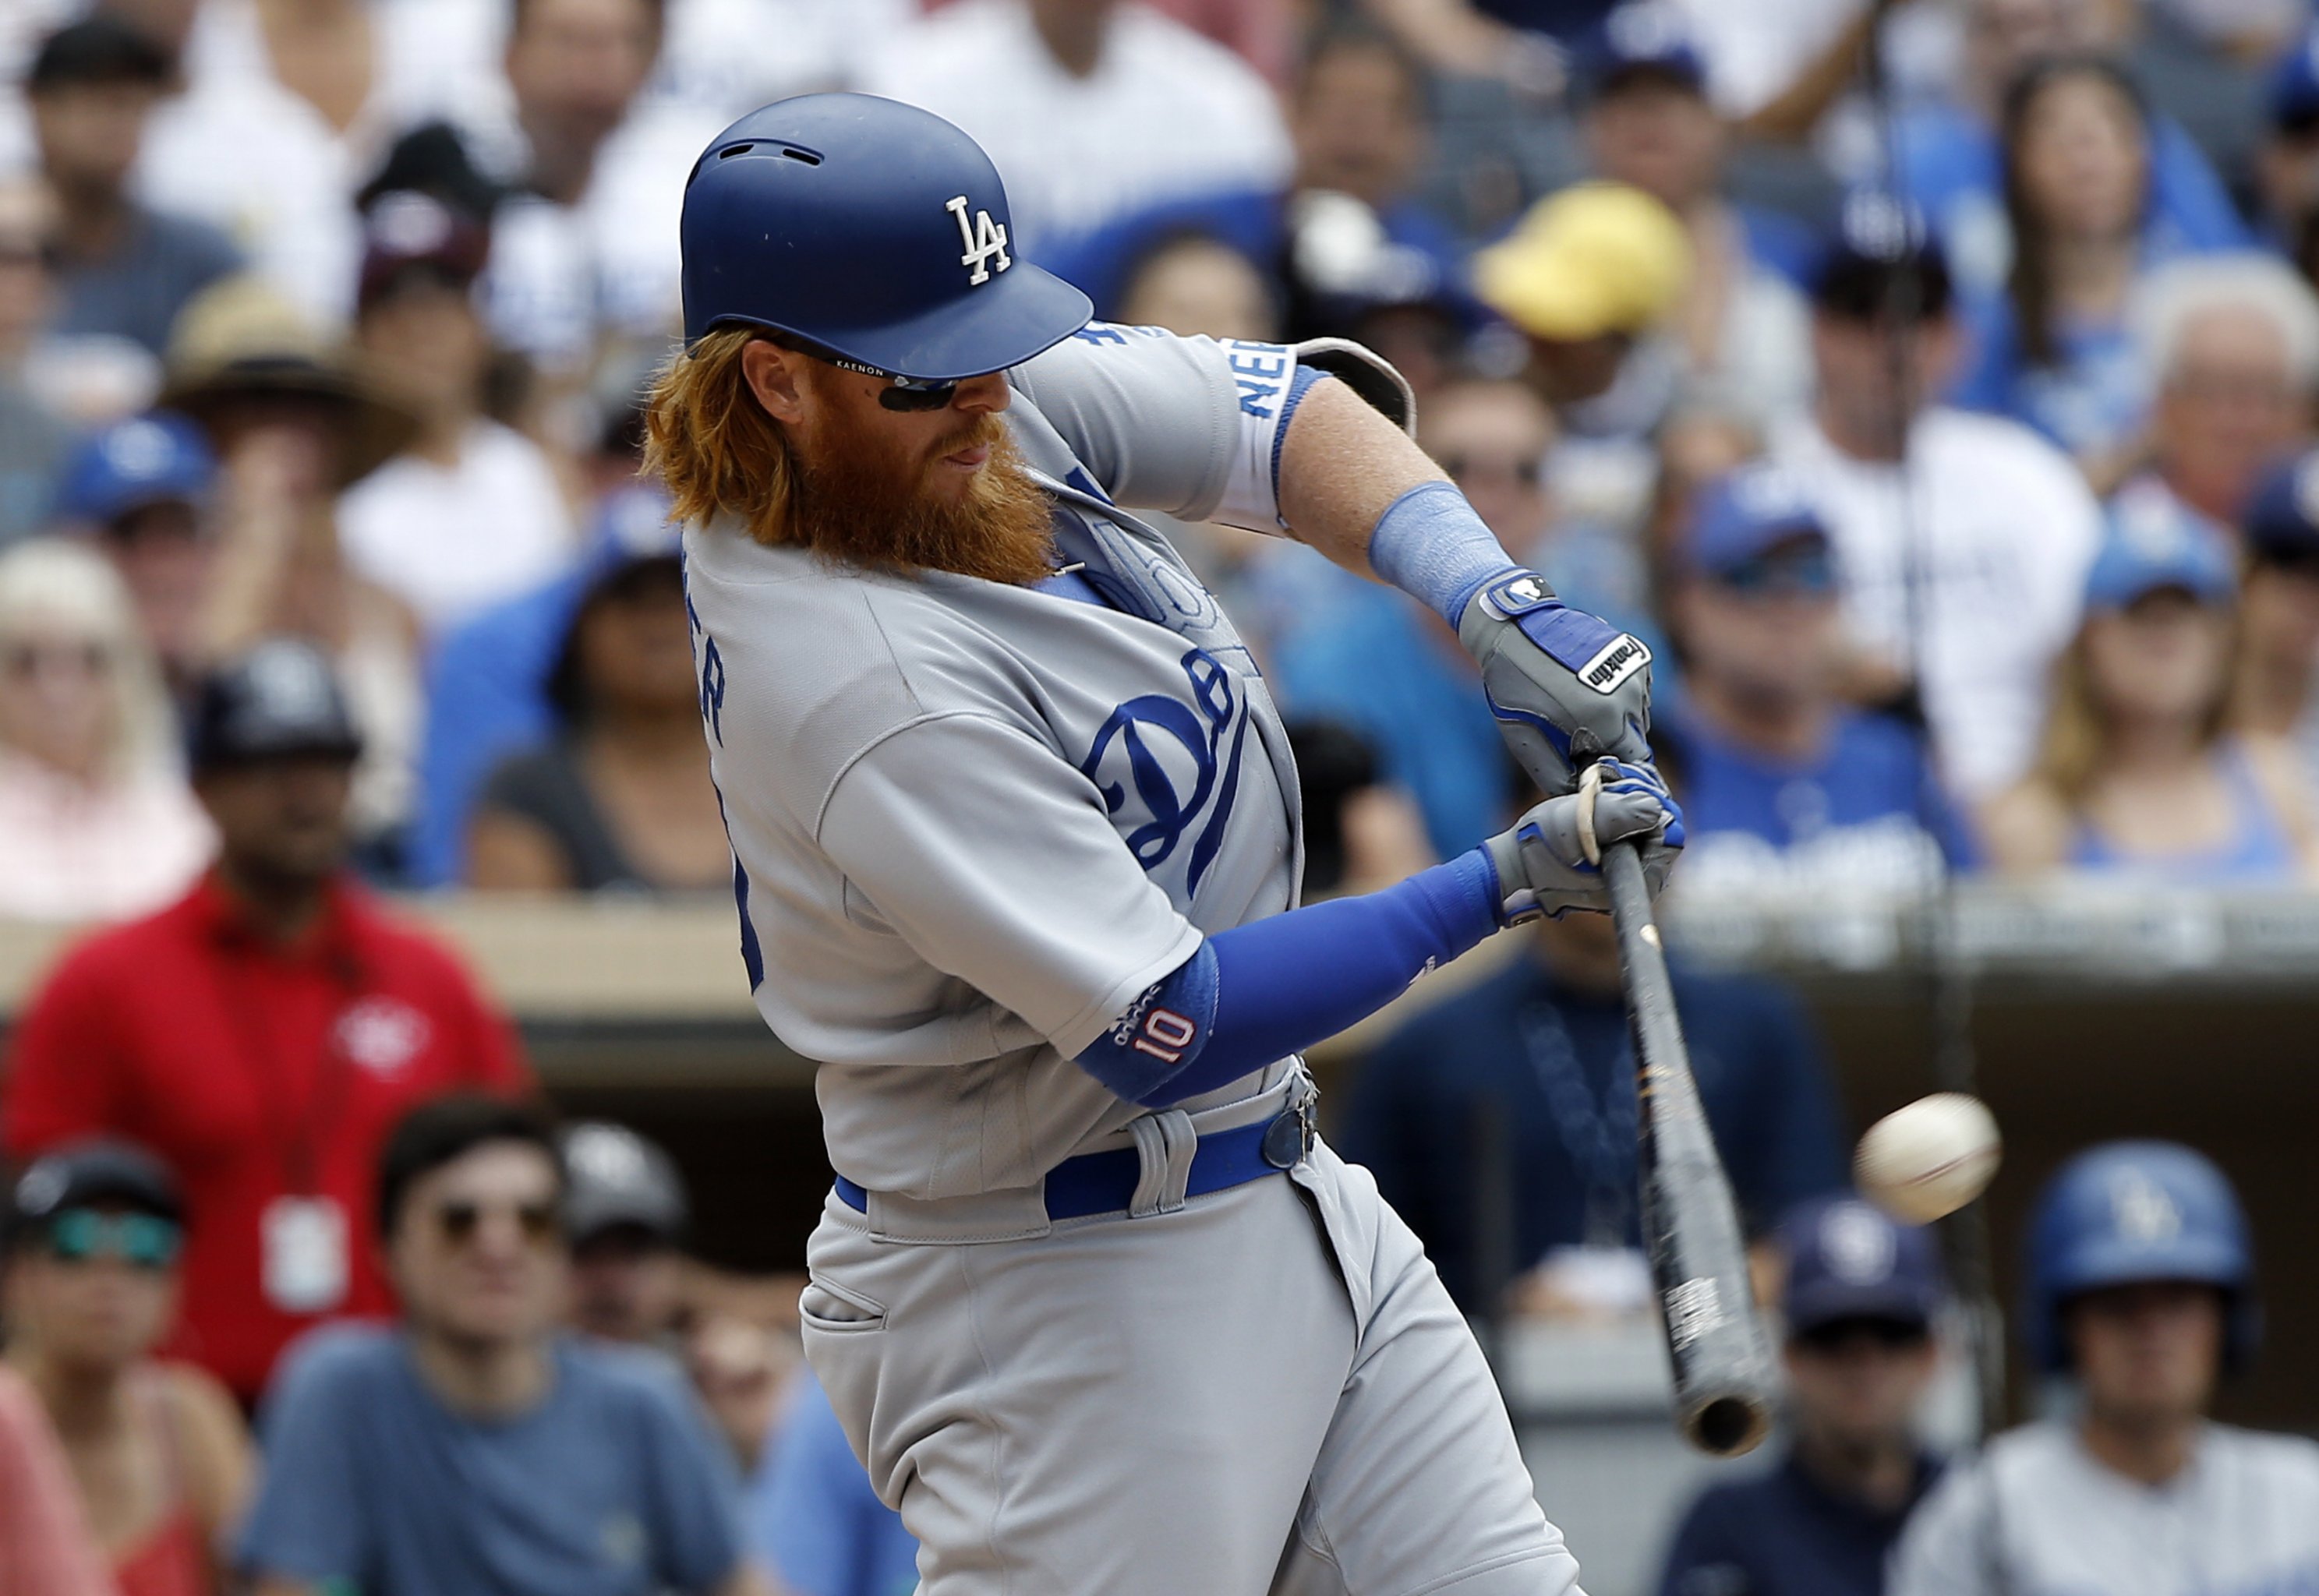 There's a simple reason why Justin Turner has a stain on his